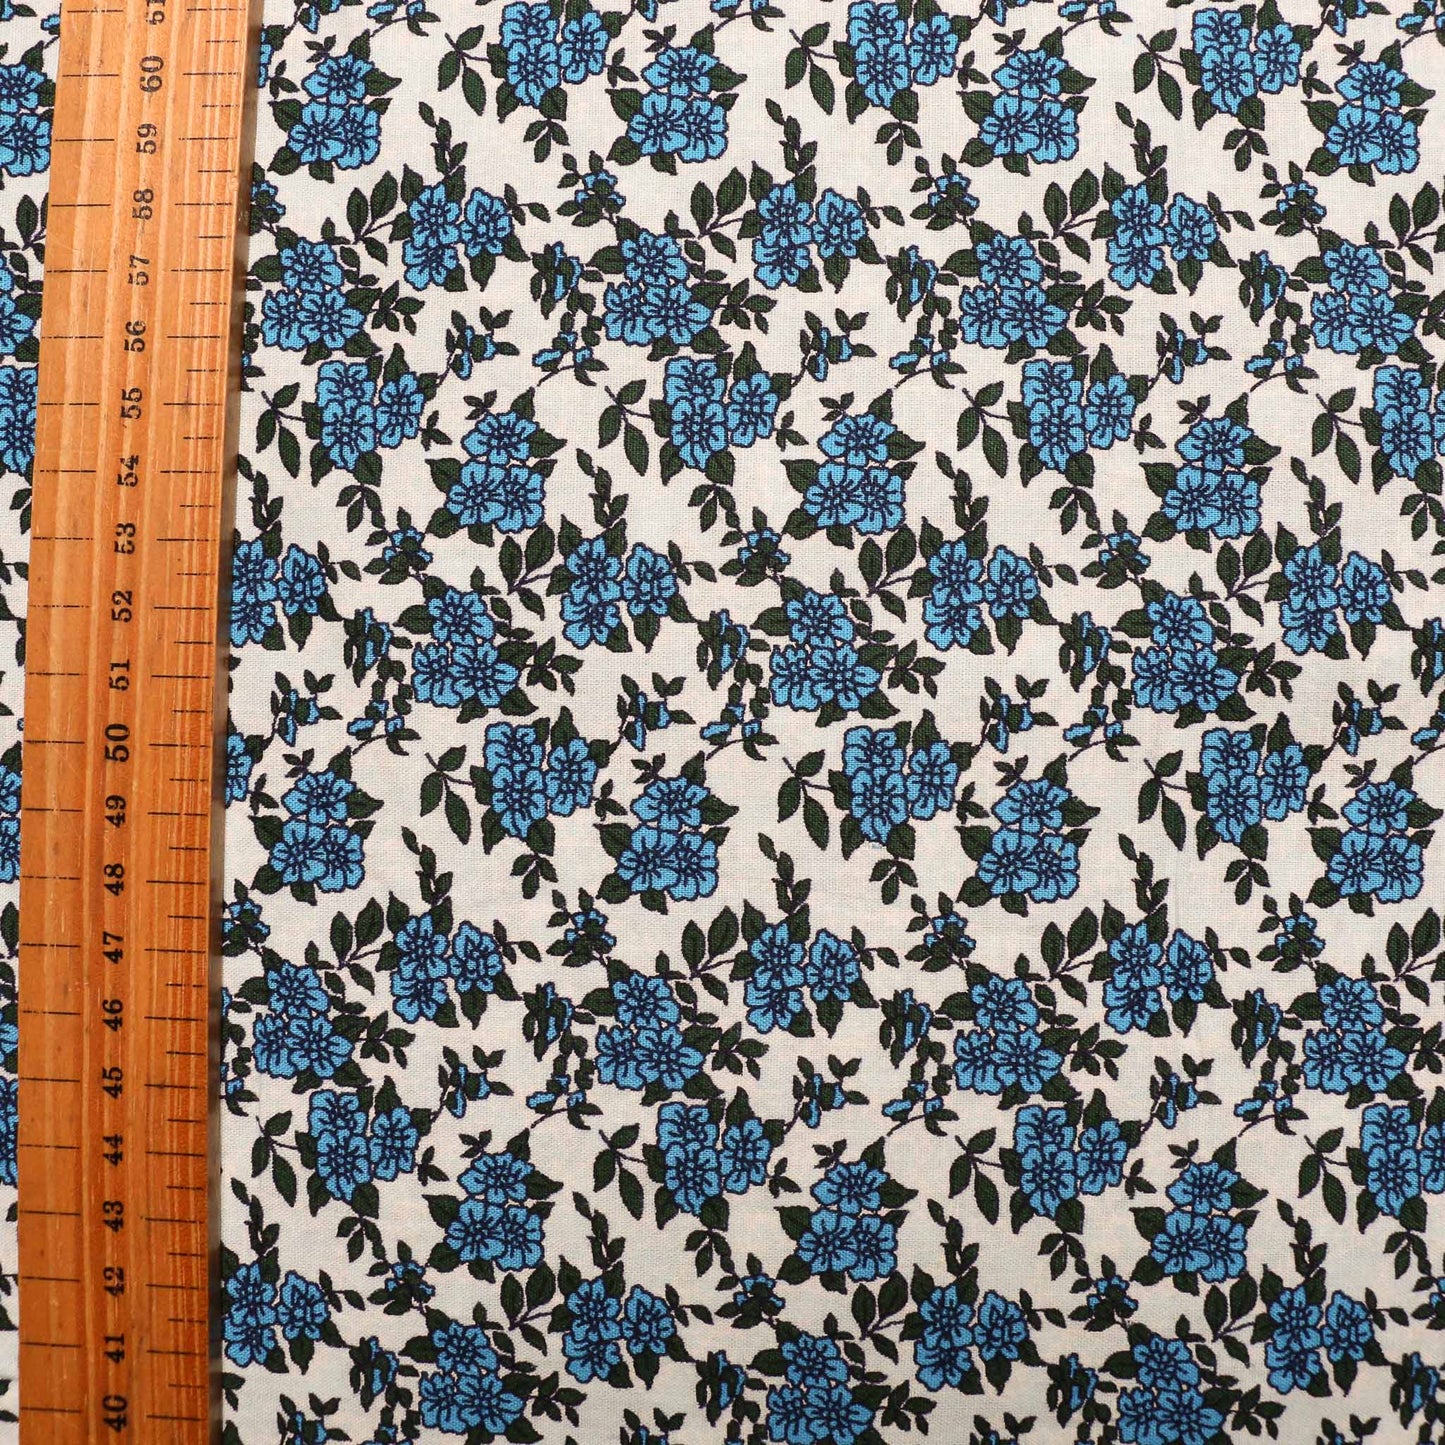 folded pale blue vintage cotton poplin deadstock sustainable fabric with printed floral pattern